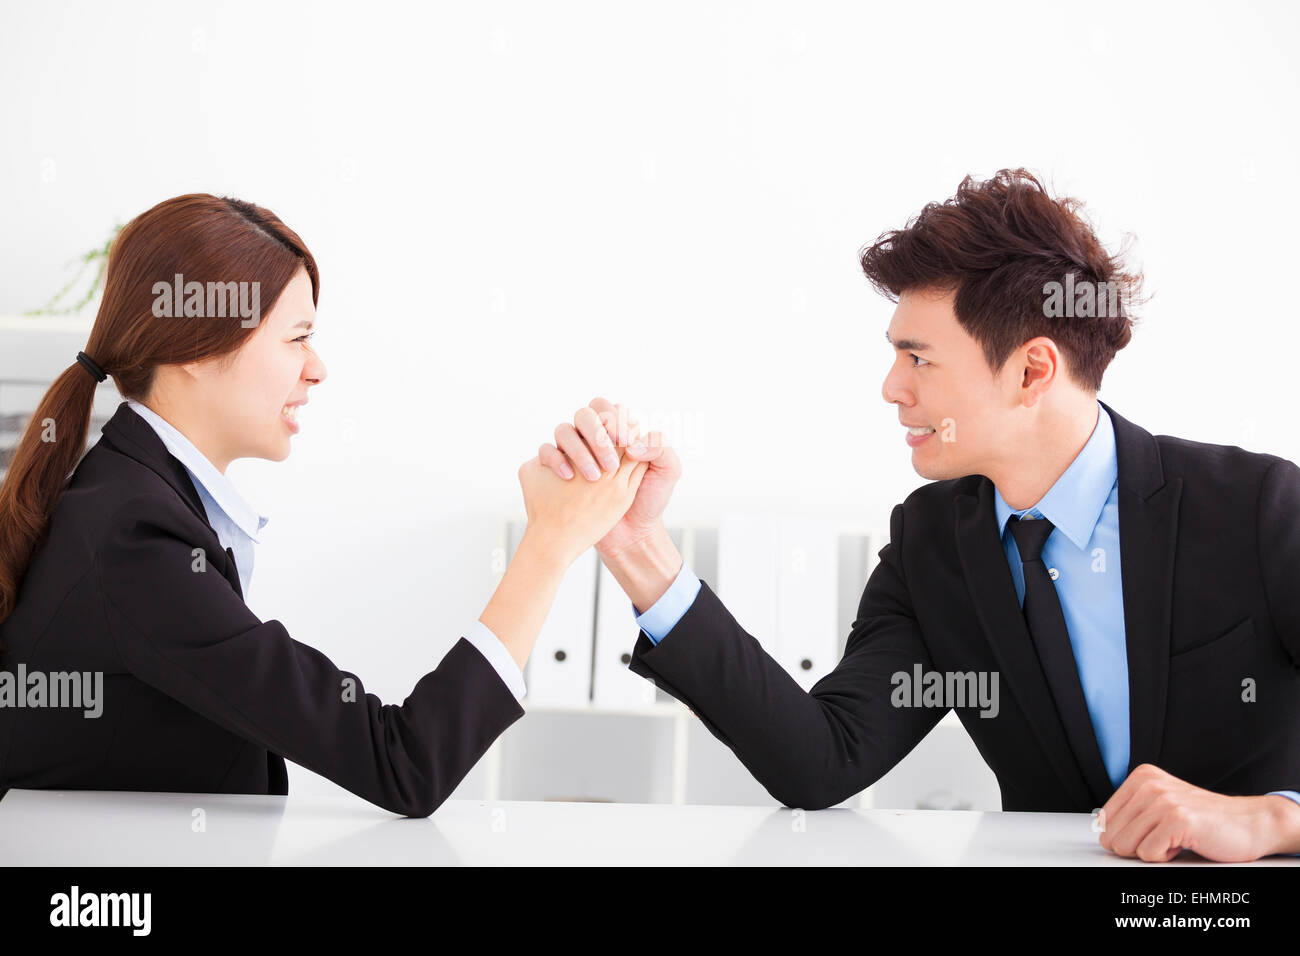 Business man and woman Arm wrestling on desk in office Banque D'Images